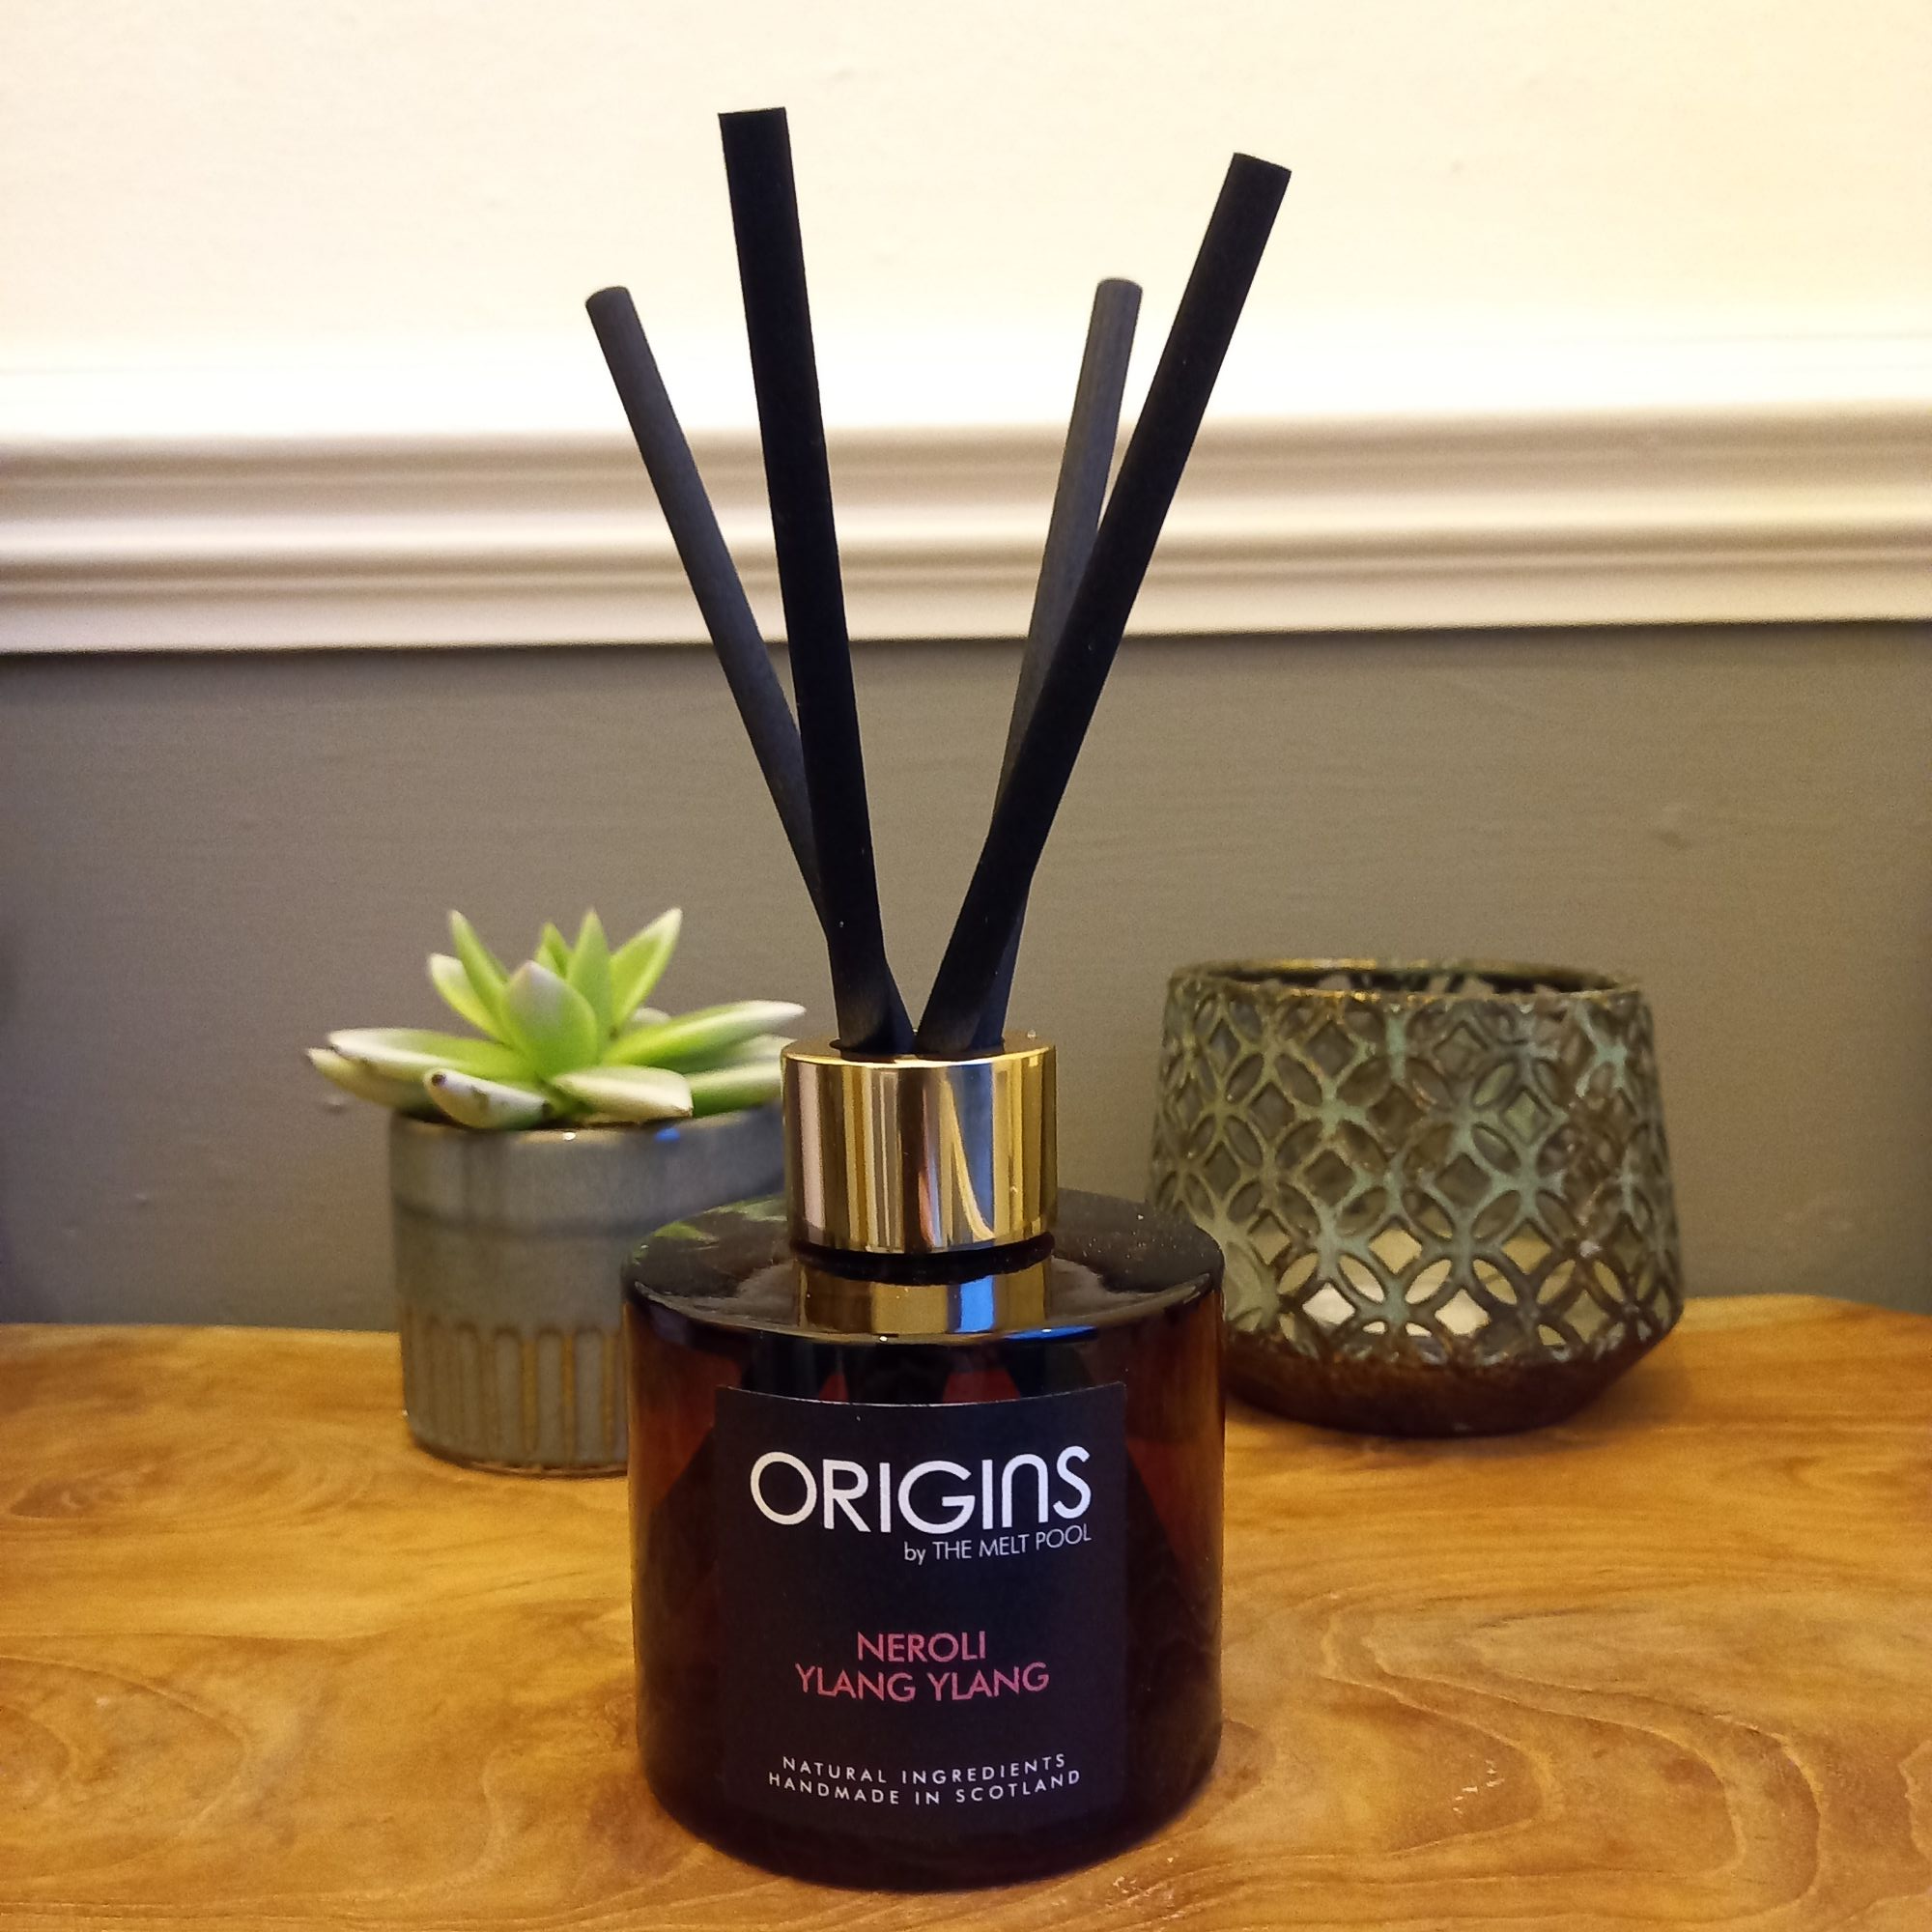 Origins Reed Diffusser scented with Neroli and Ylang Ylang